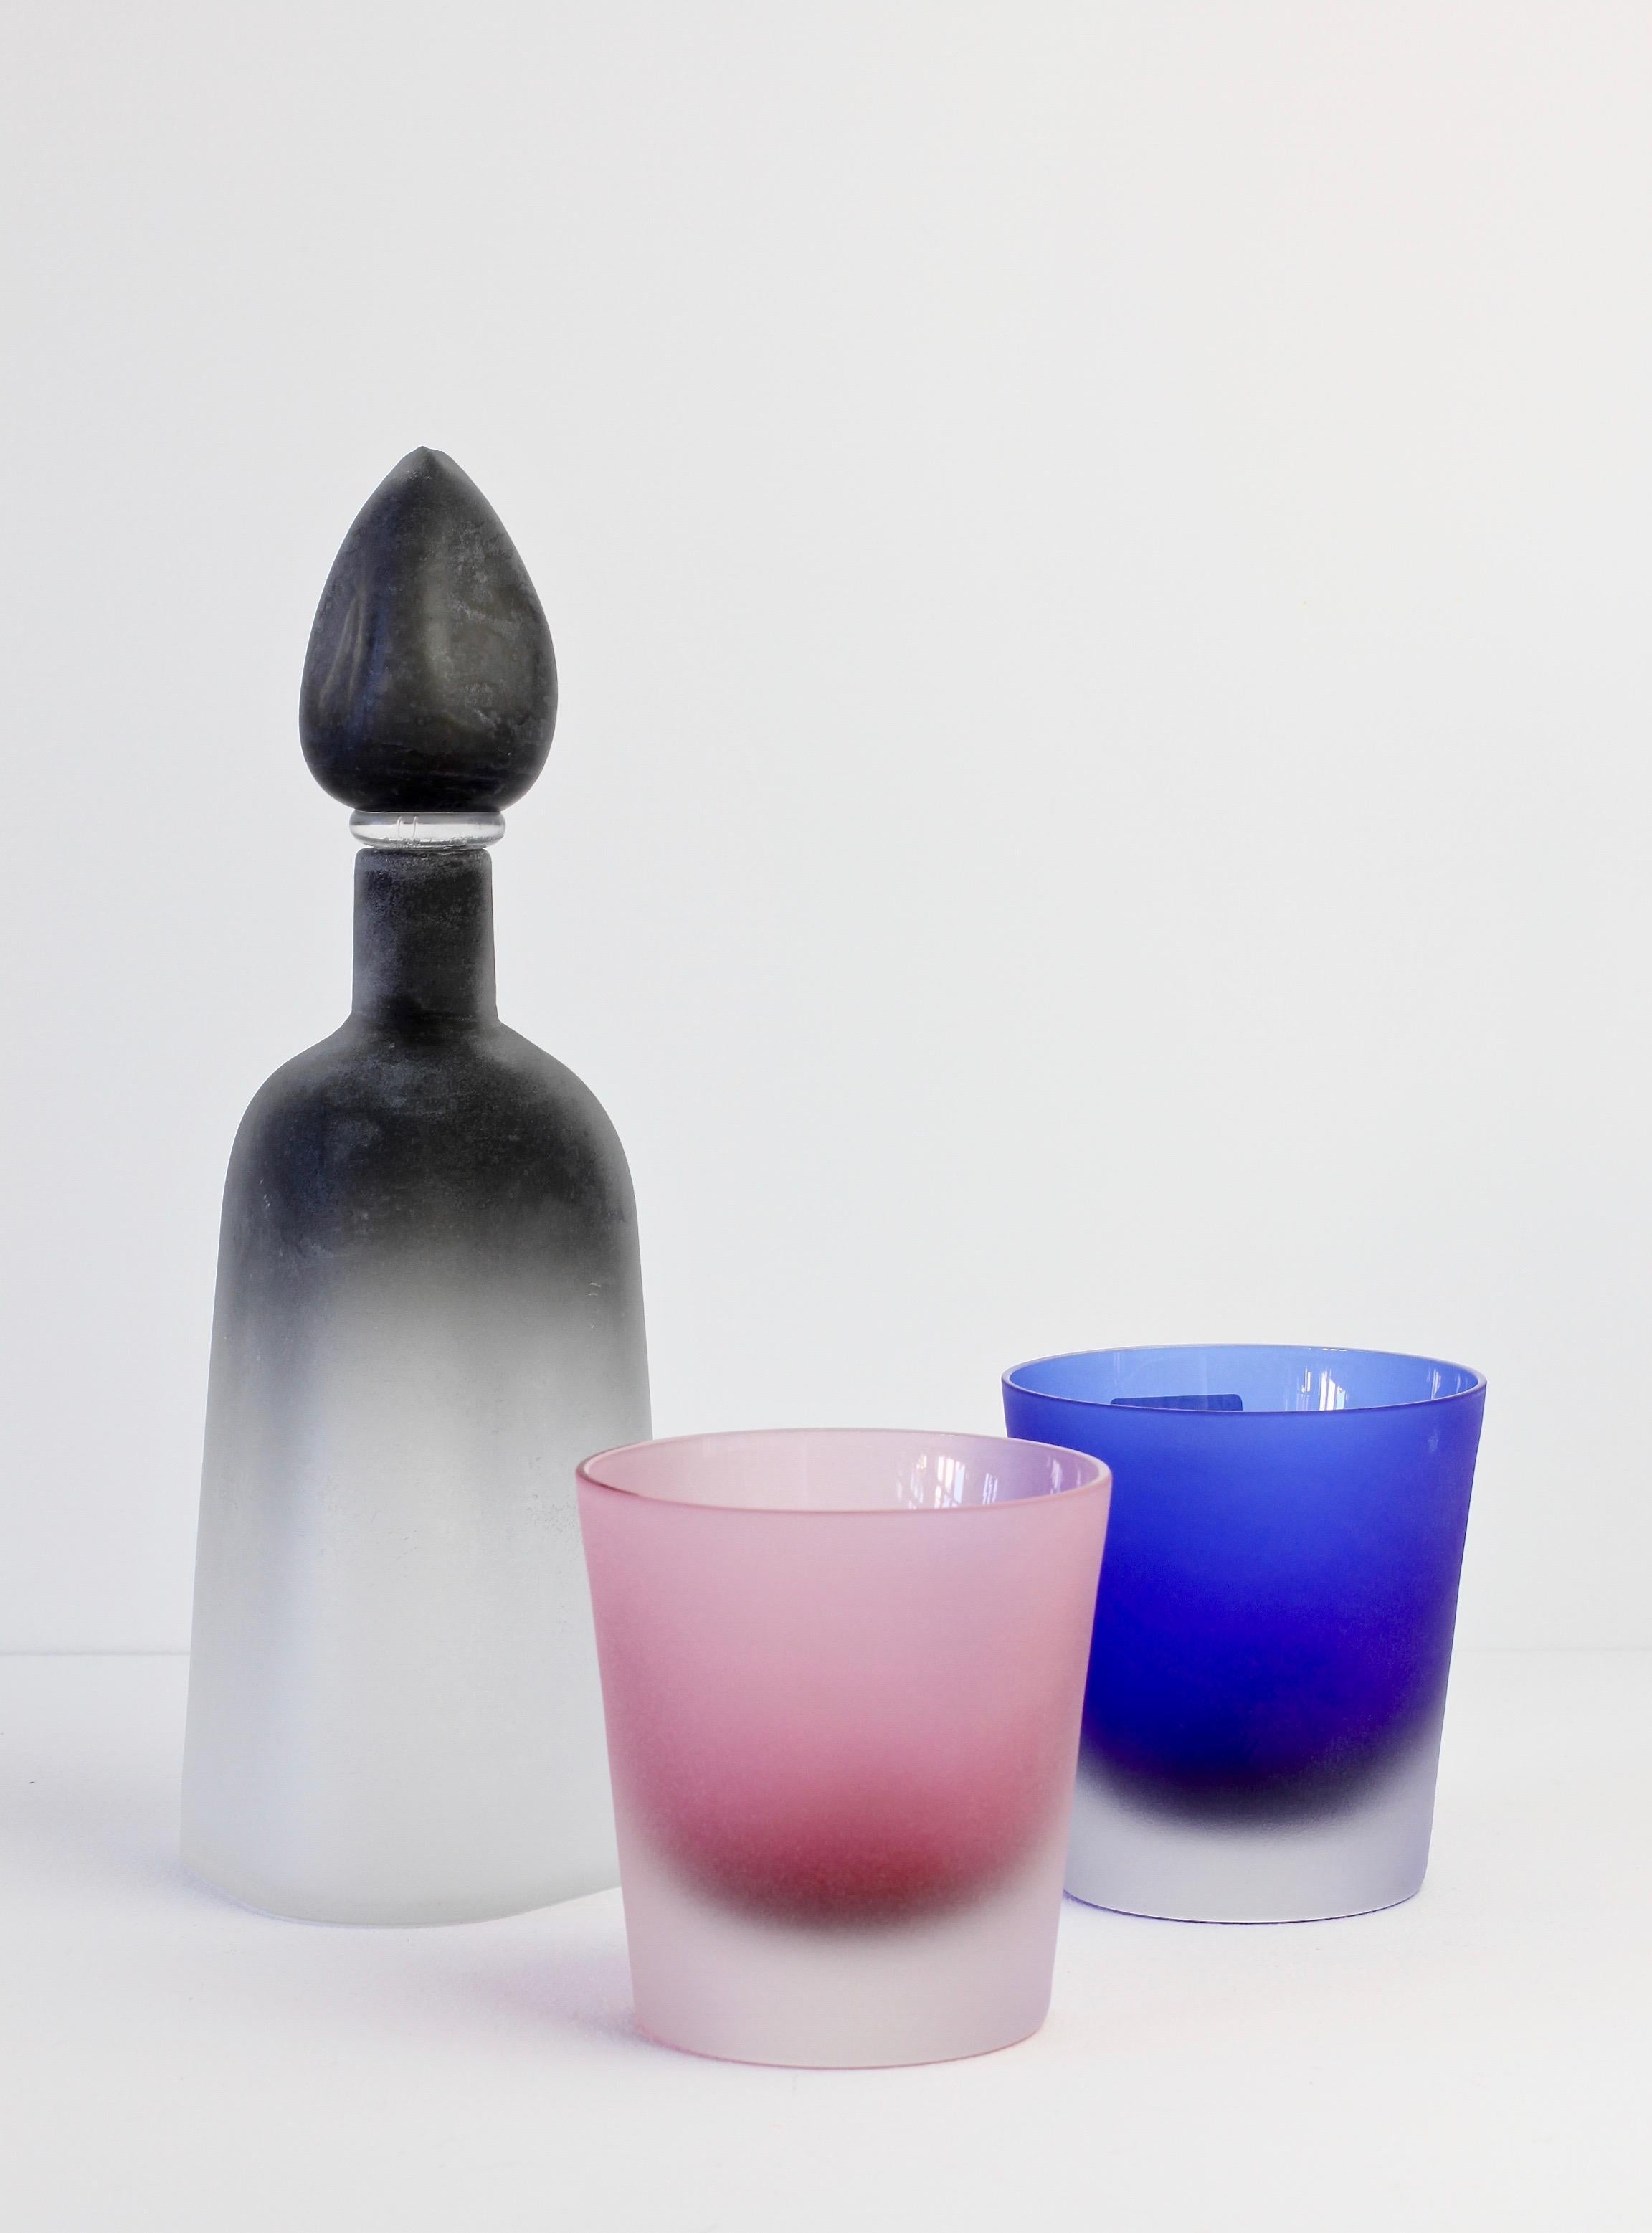 Cenedese flask / bottle with 'His and Hers' glasses in pink and blue coloured frosted glass. Perfect as a gift - just imagine a romantic evening in front of the fire sipping your favourite tipple - a whisky or brandy - from these most beautiful